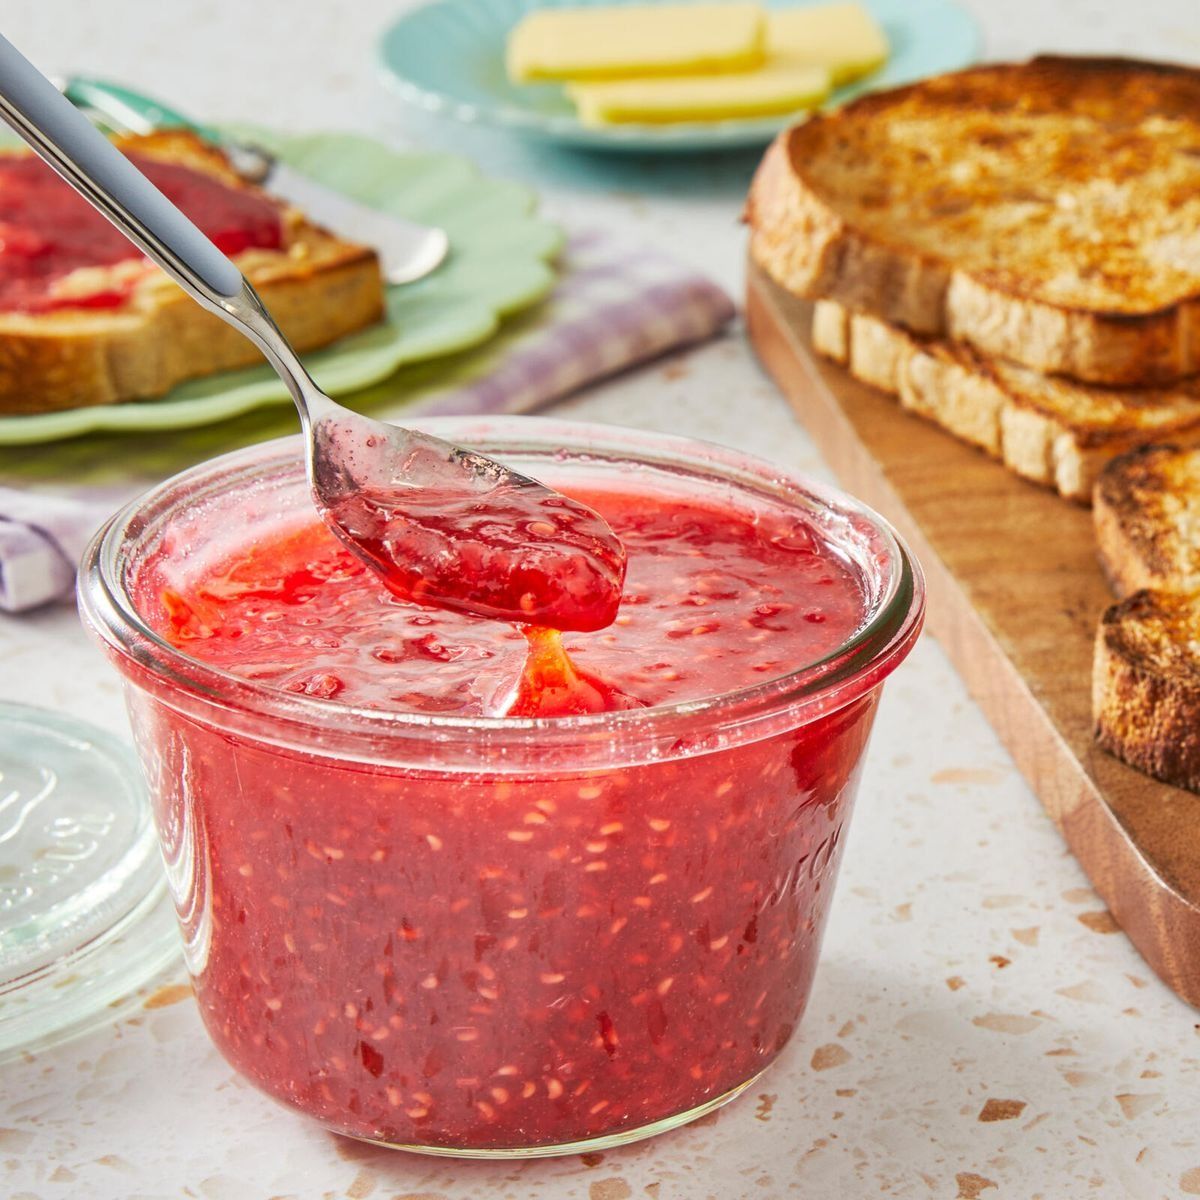 How to Make Jam (No Canning Required} - FeelGoodFoodie